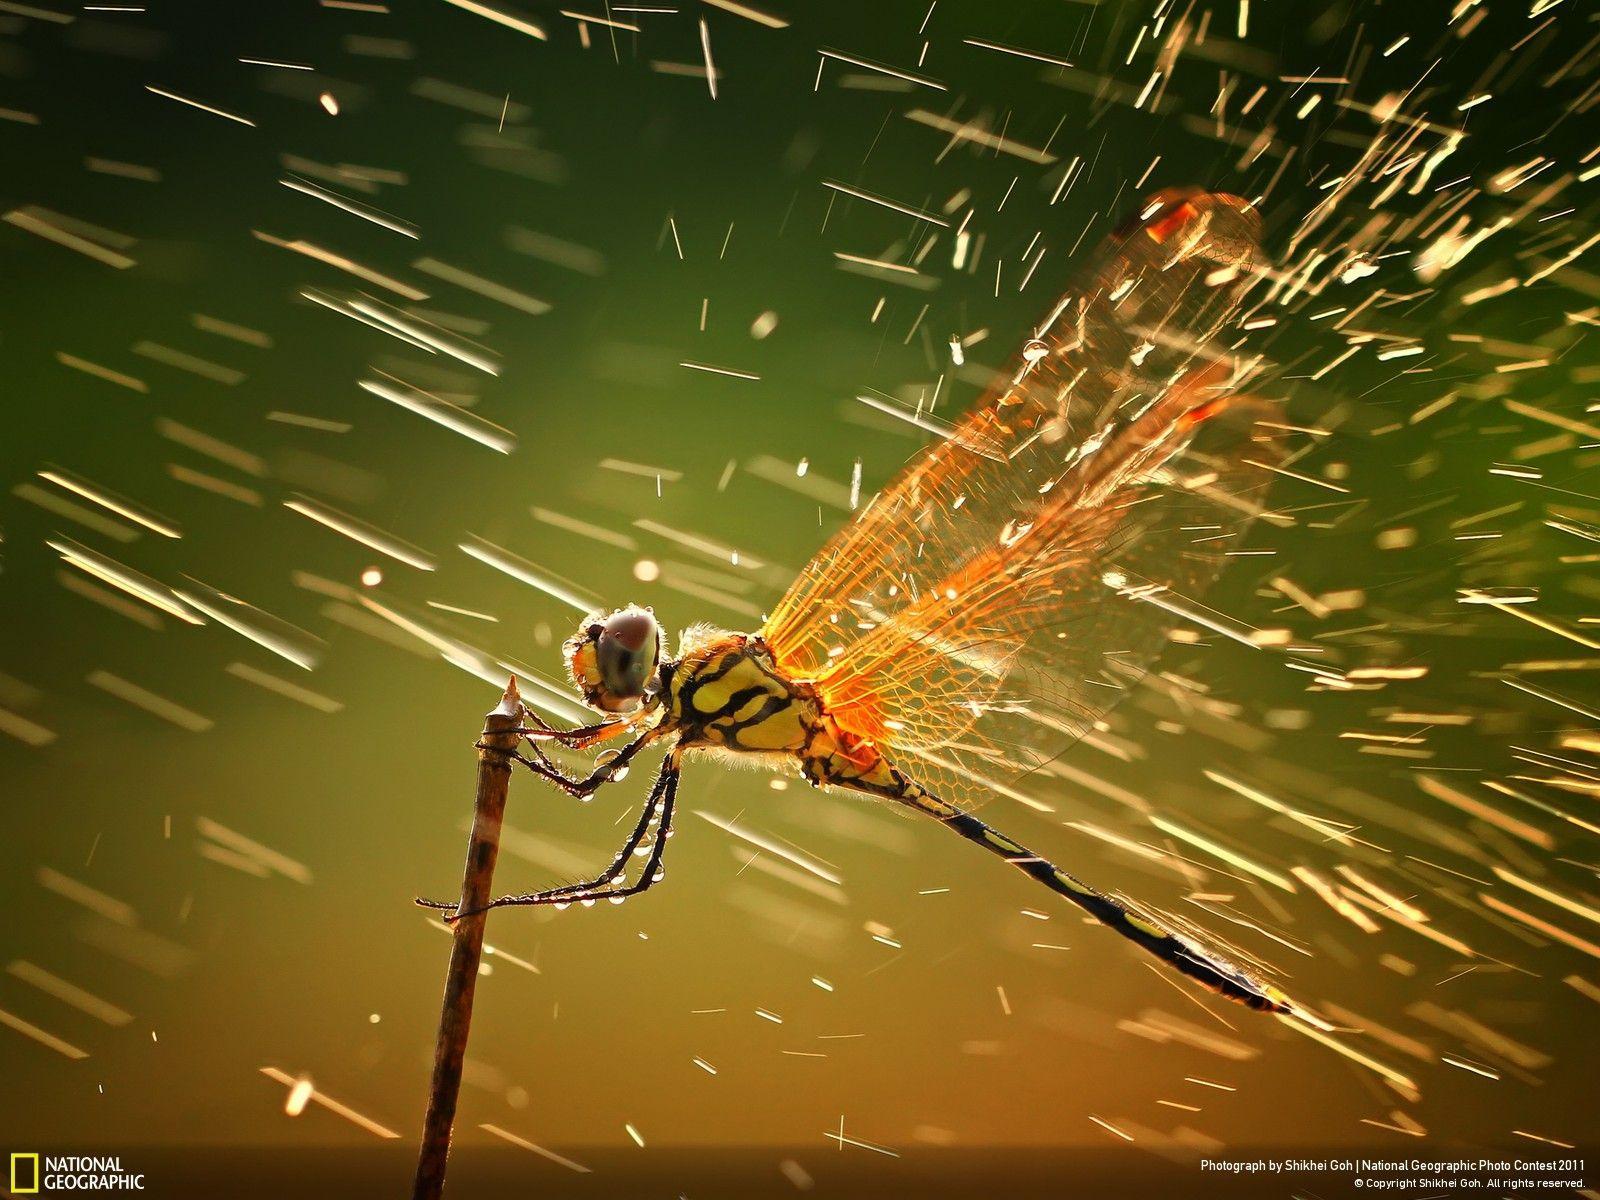 image about National Geographic Winner Wallpaper